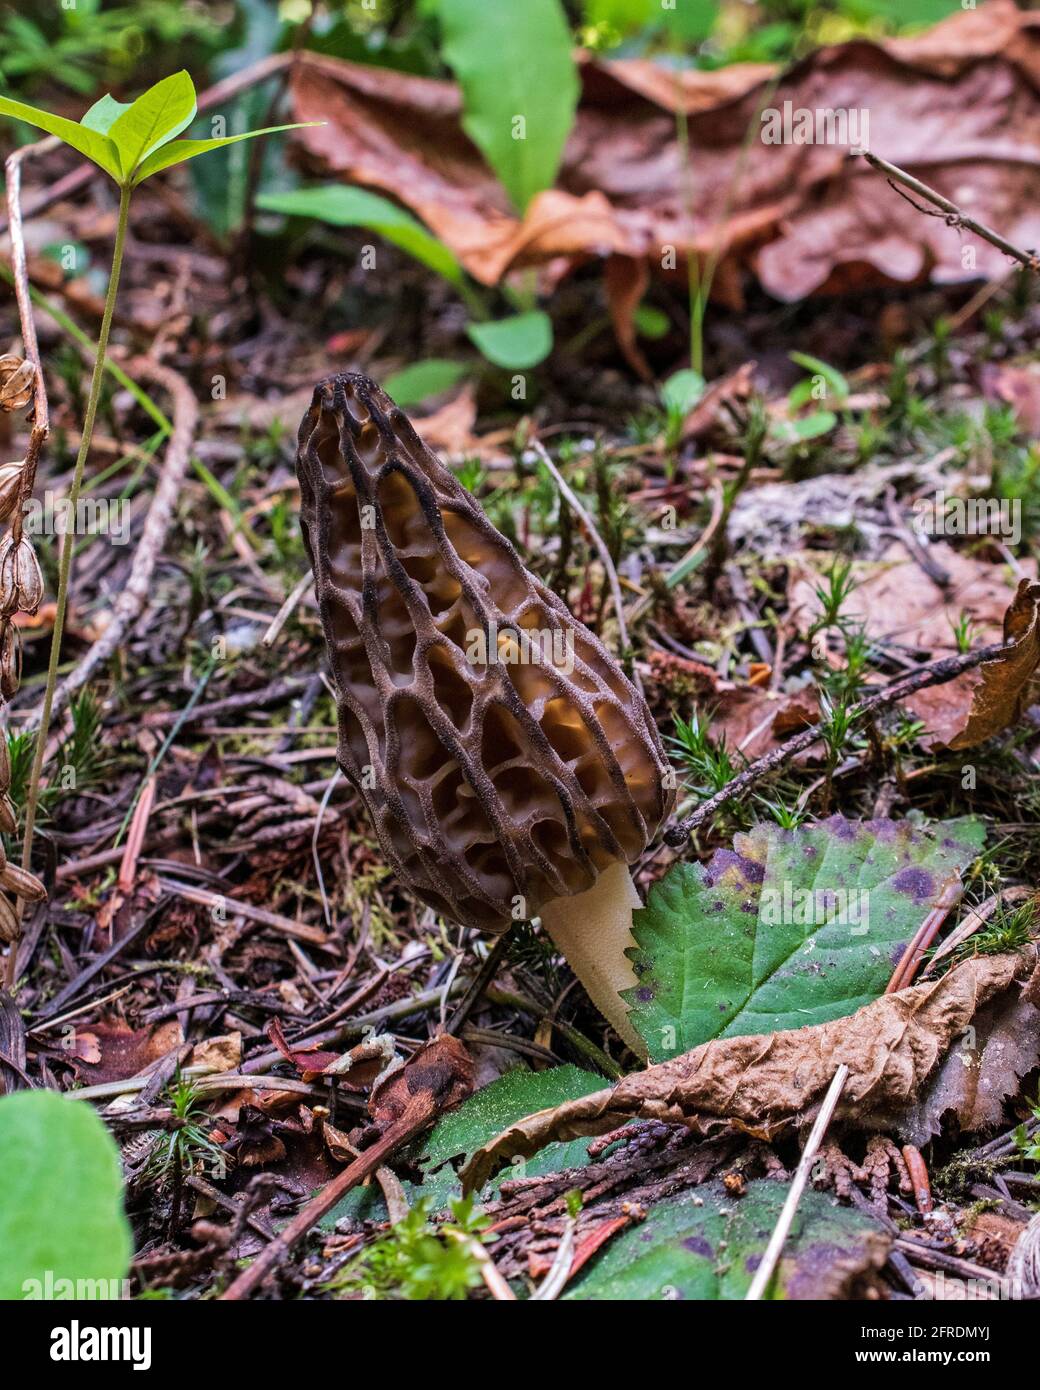 Wild morel mushrooms growing on the forest floor Stock Photo